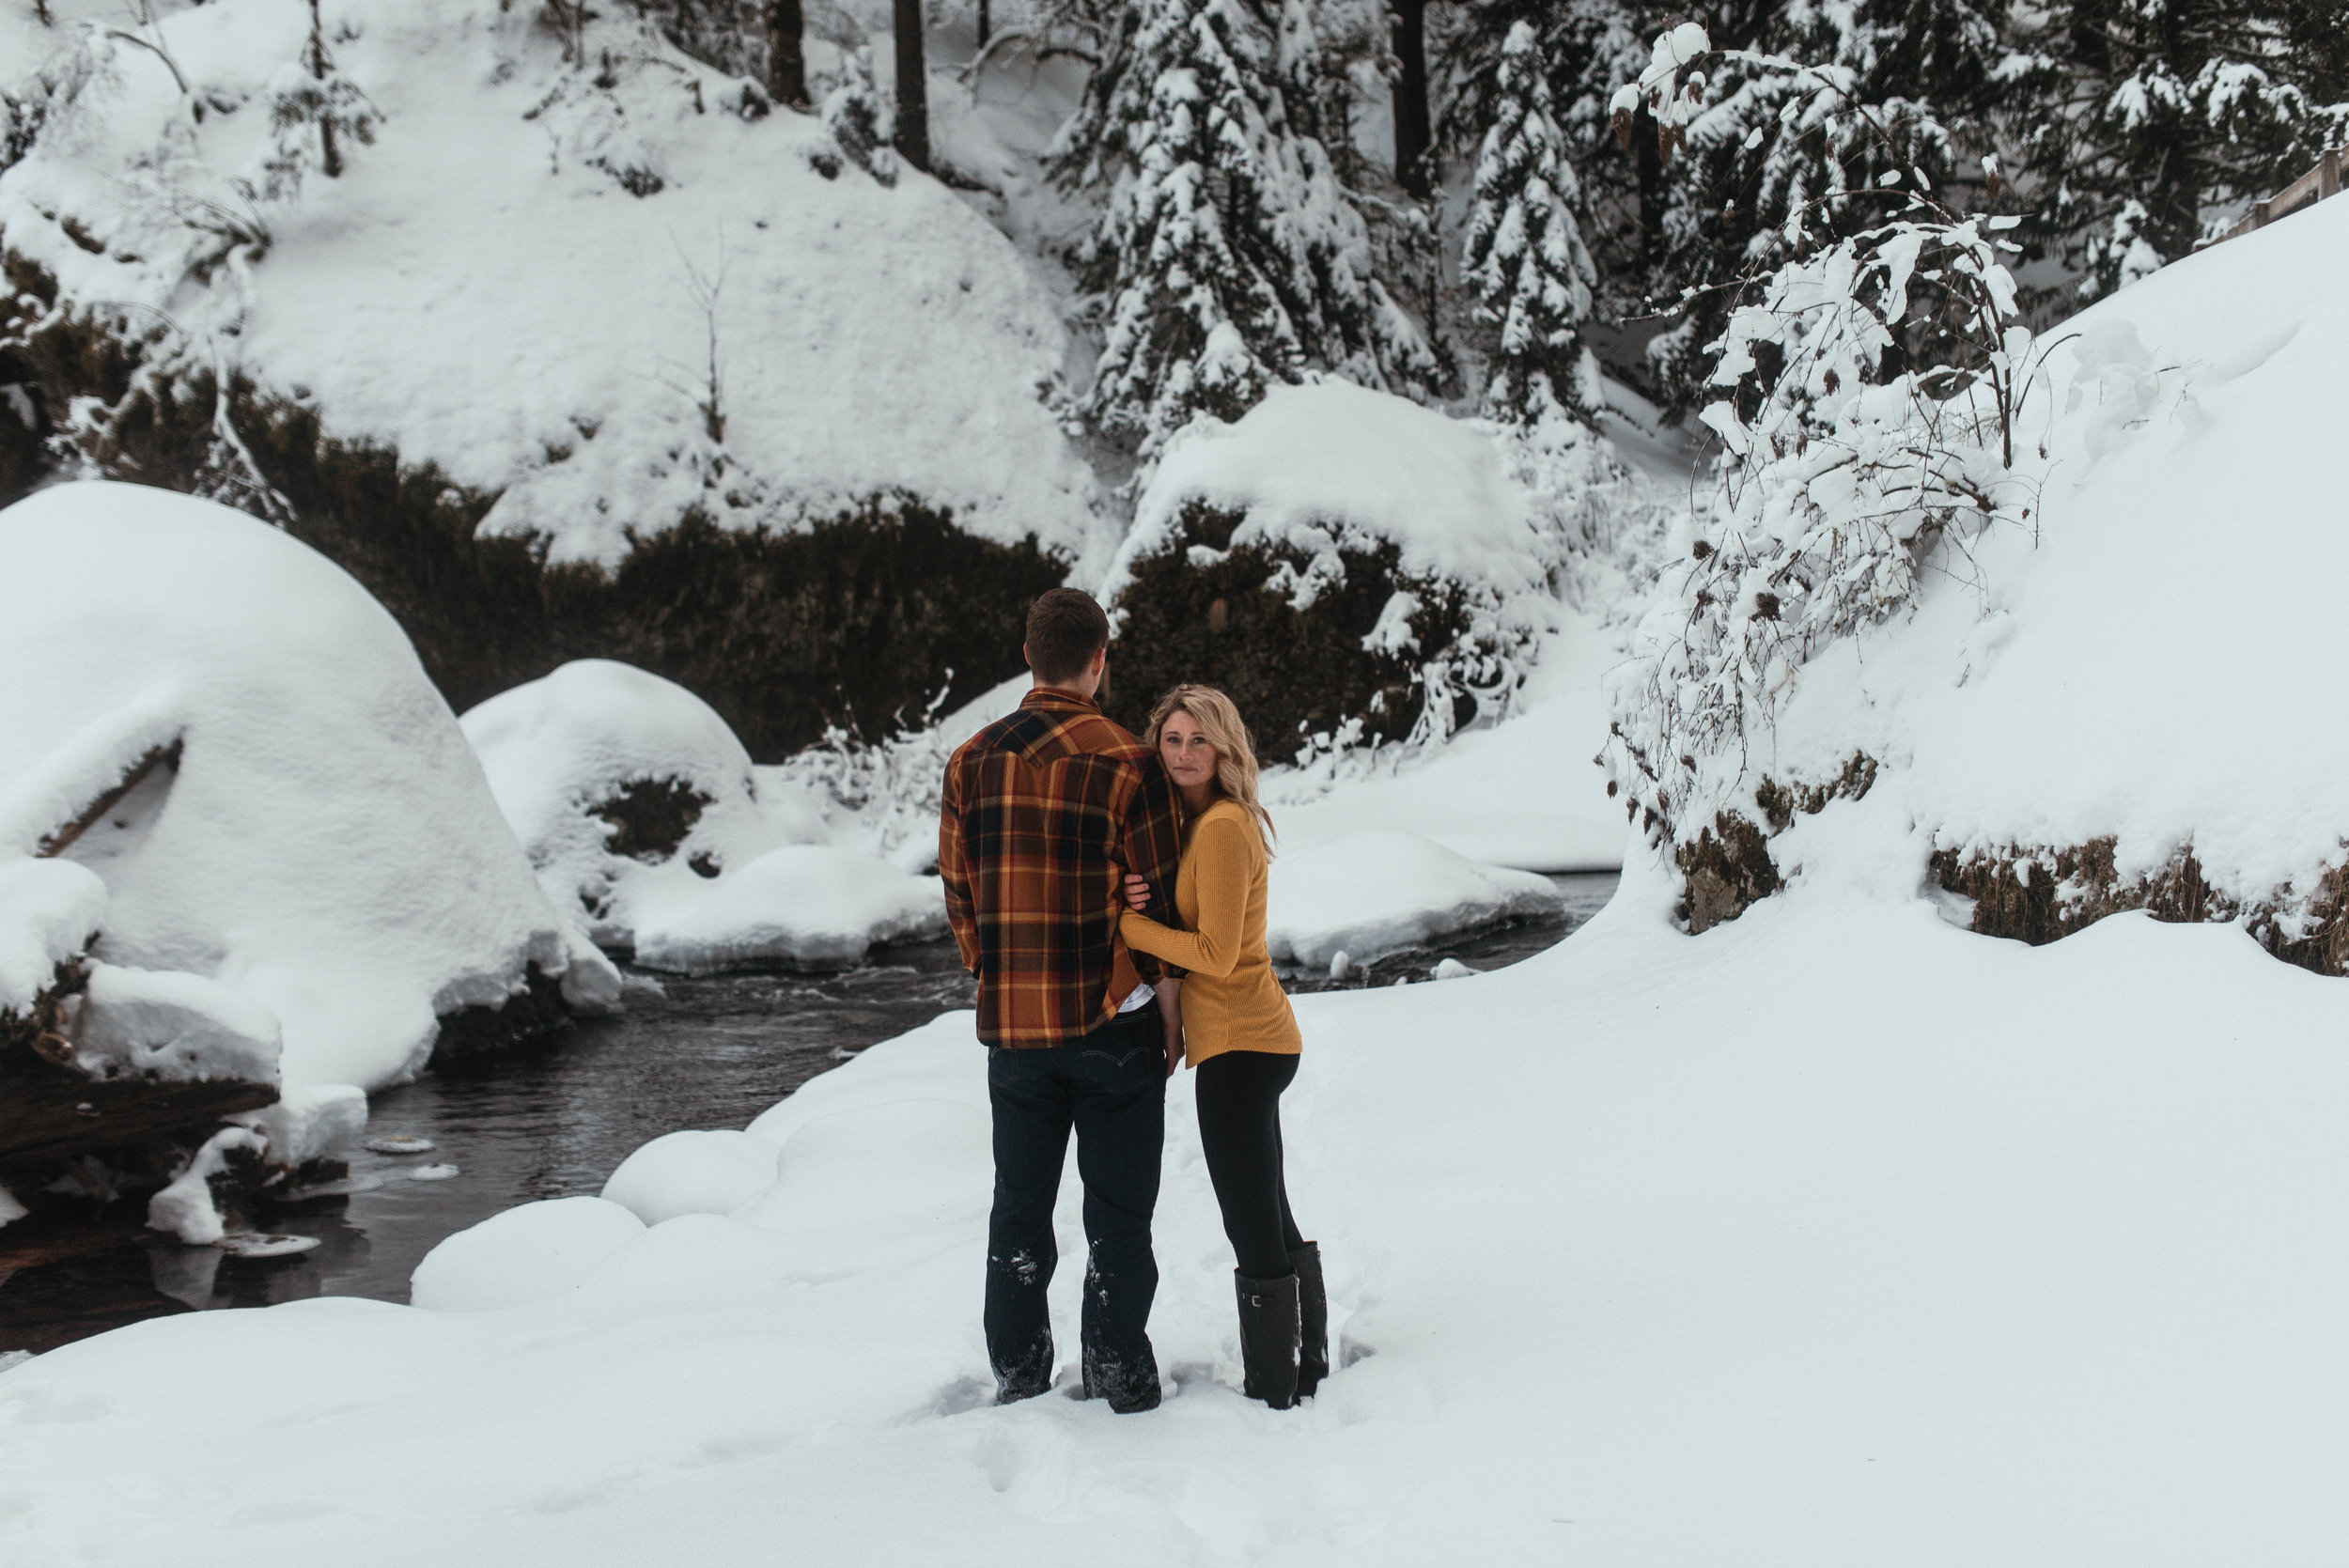 Columbia River Gorge Engagment Session | Engagement Photo Ideas | Snow Engagemens | Winter Engagement | Jessicaheronimages.com | Oregon Waterfall Engagment | Oregon Photographer | PNW Engagment